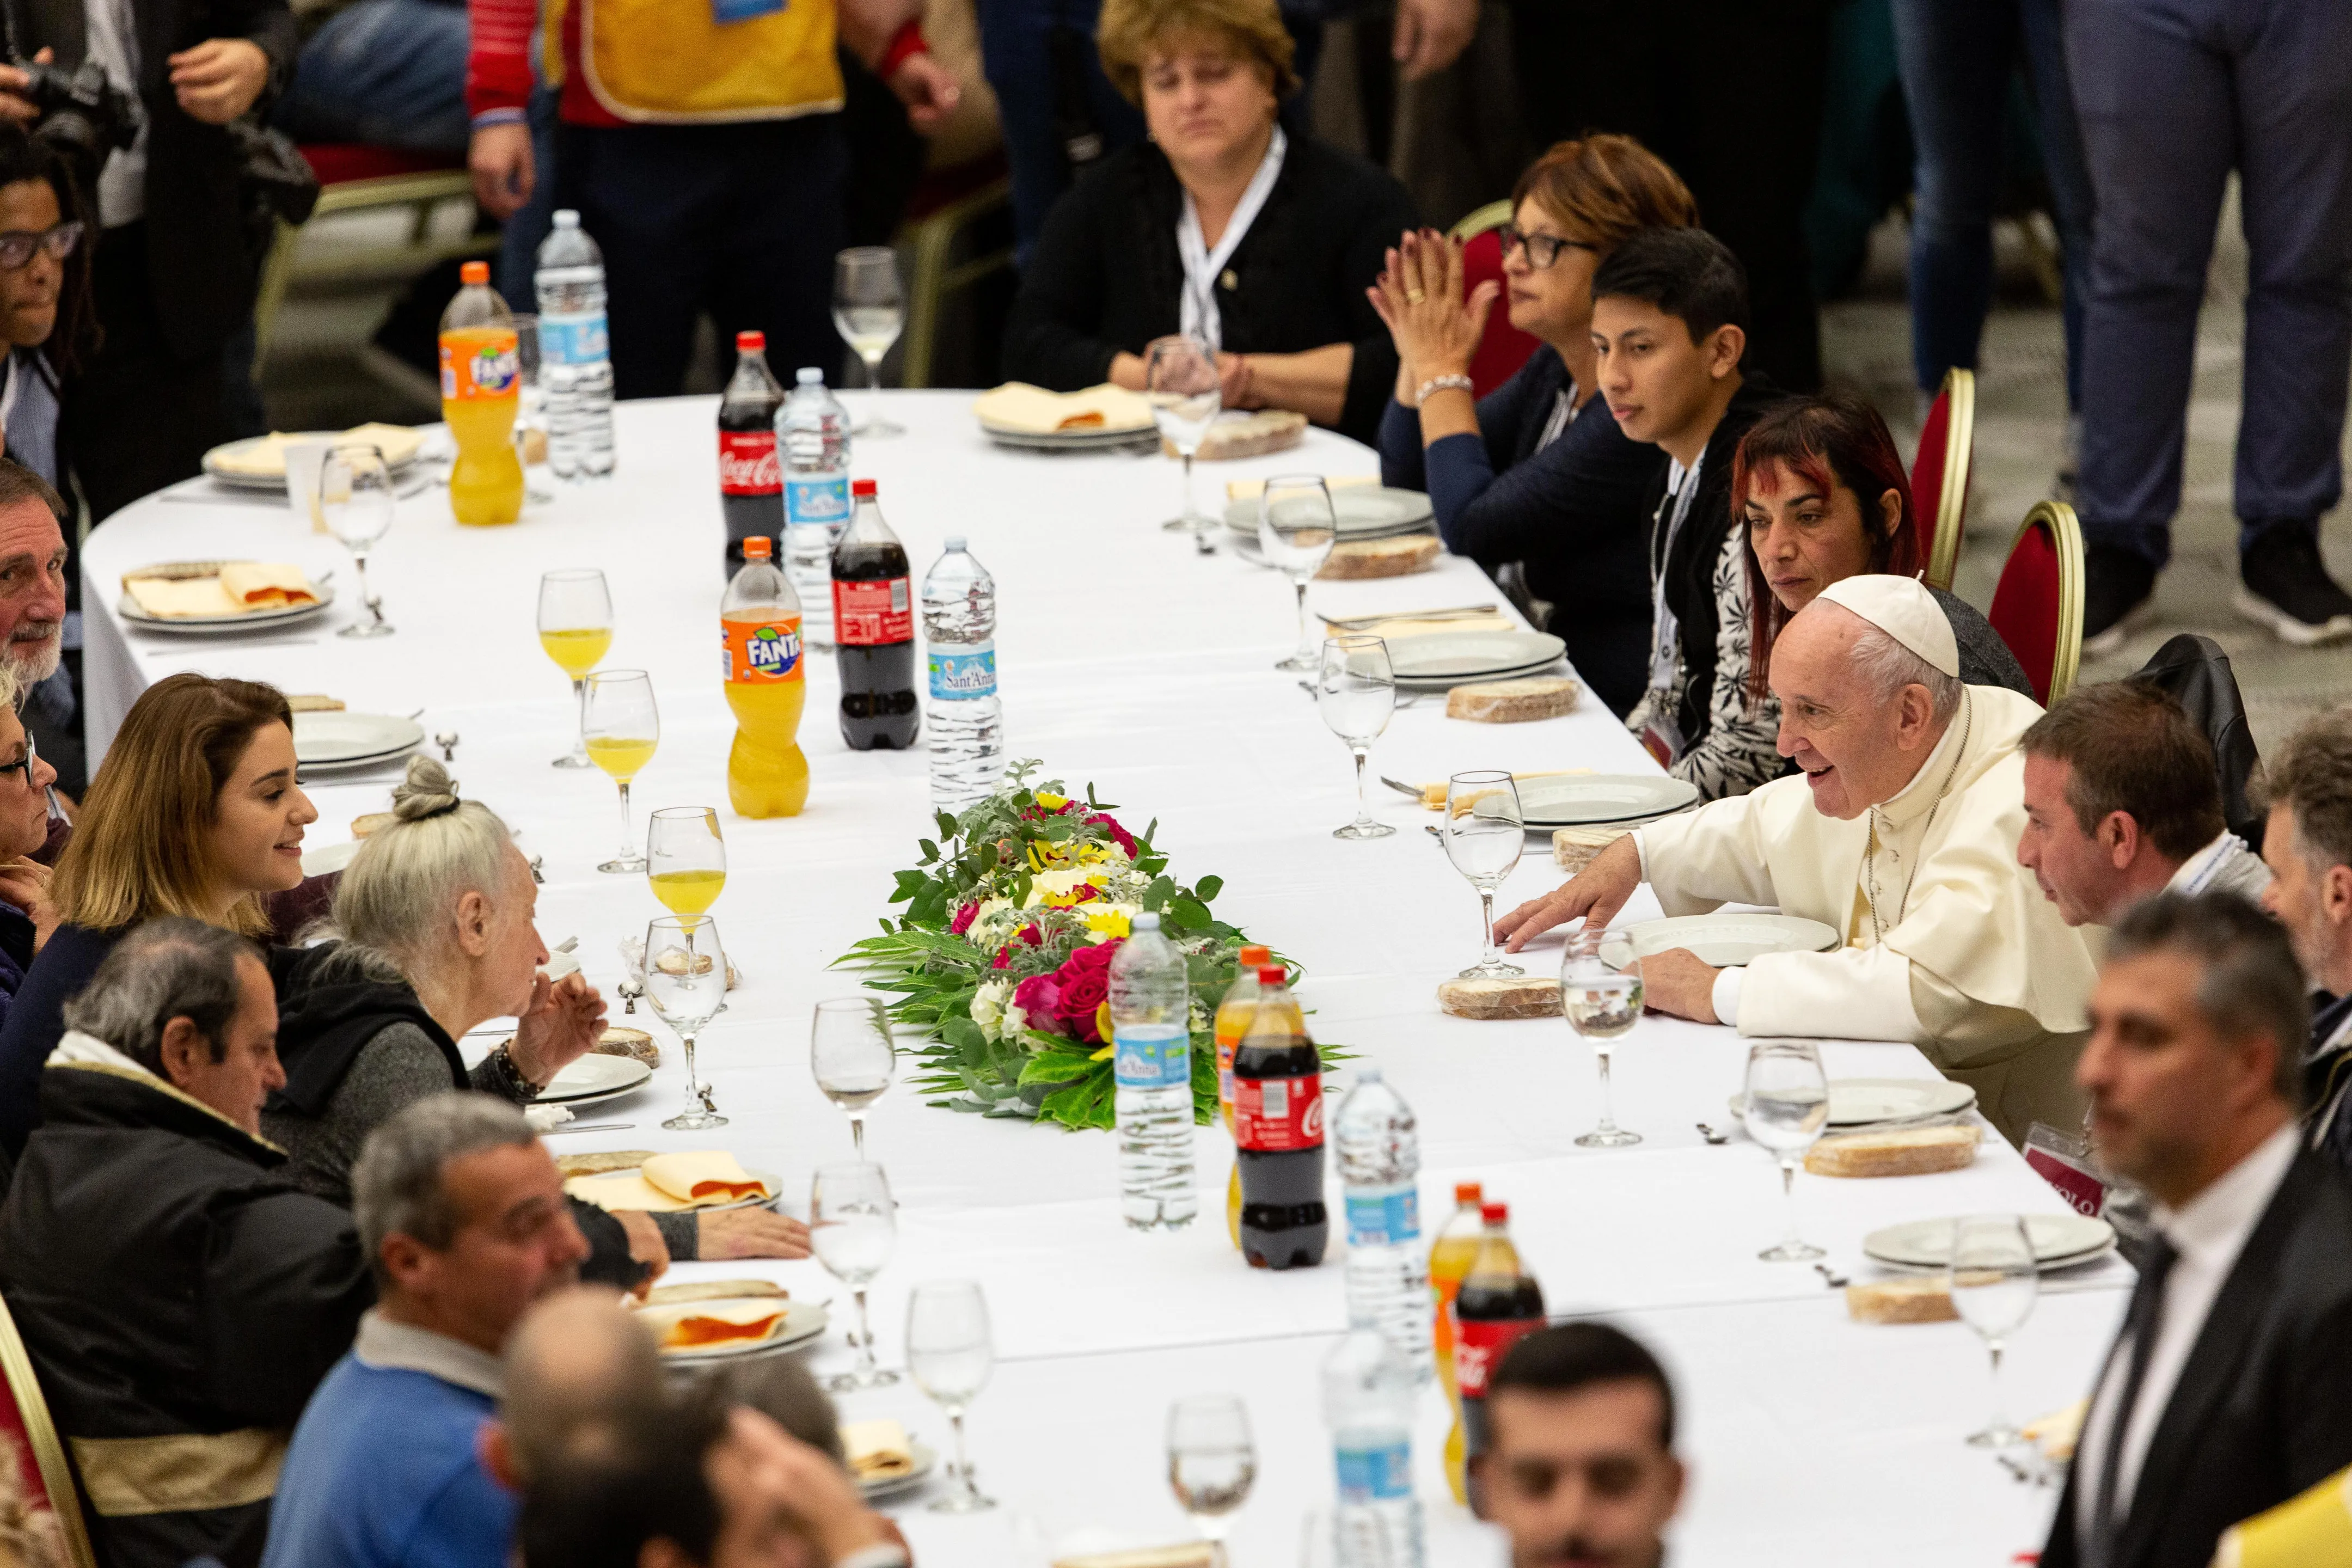 On Nov. 17, 2019, Pope Francis shared a free lunch with nearly 1,500 poor people invited to dine at the Vatican for the 3rd annual World Day of the Poor?w=200&h=150